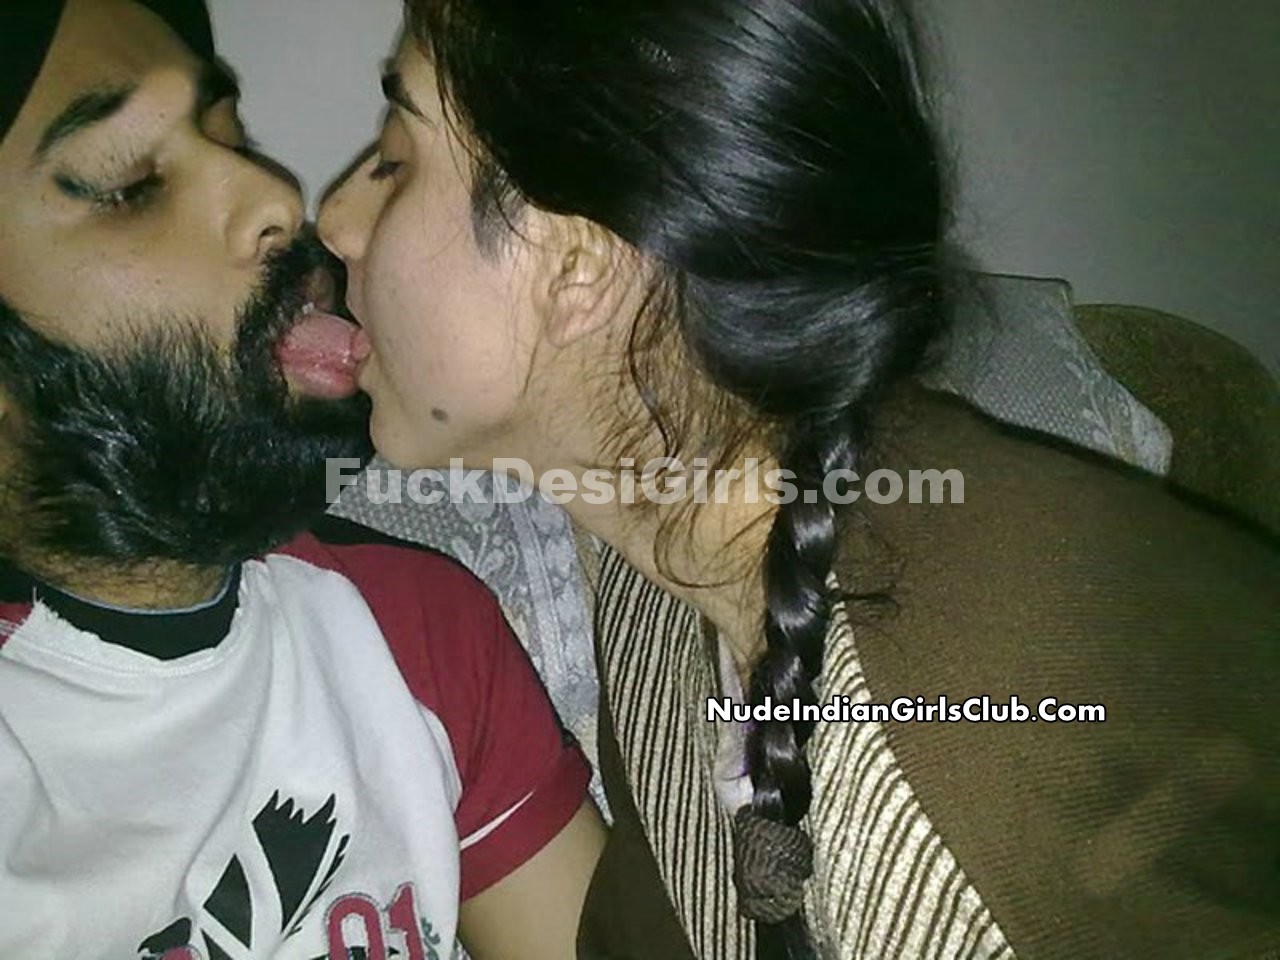 punjab girls picture sex and kiss sex gallerie